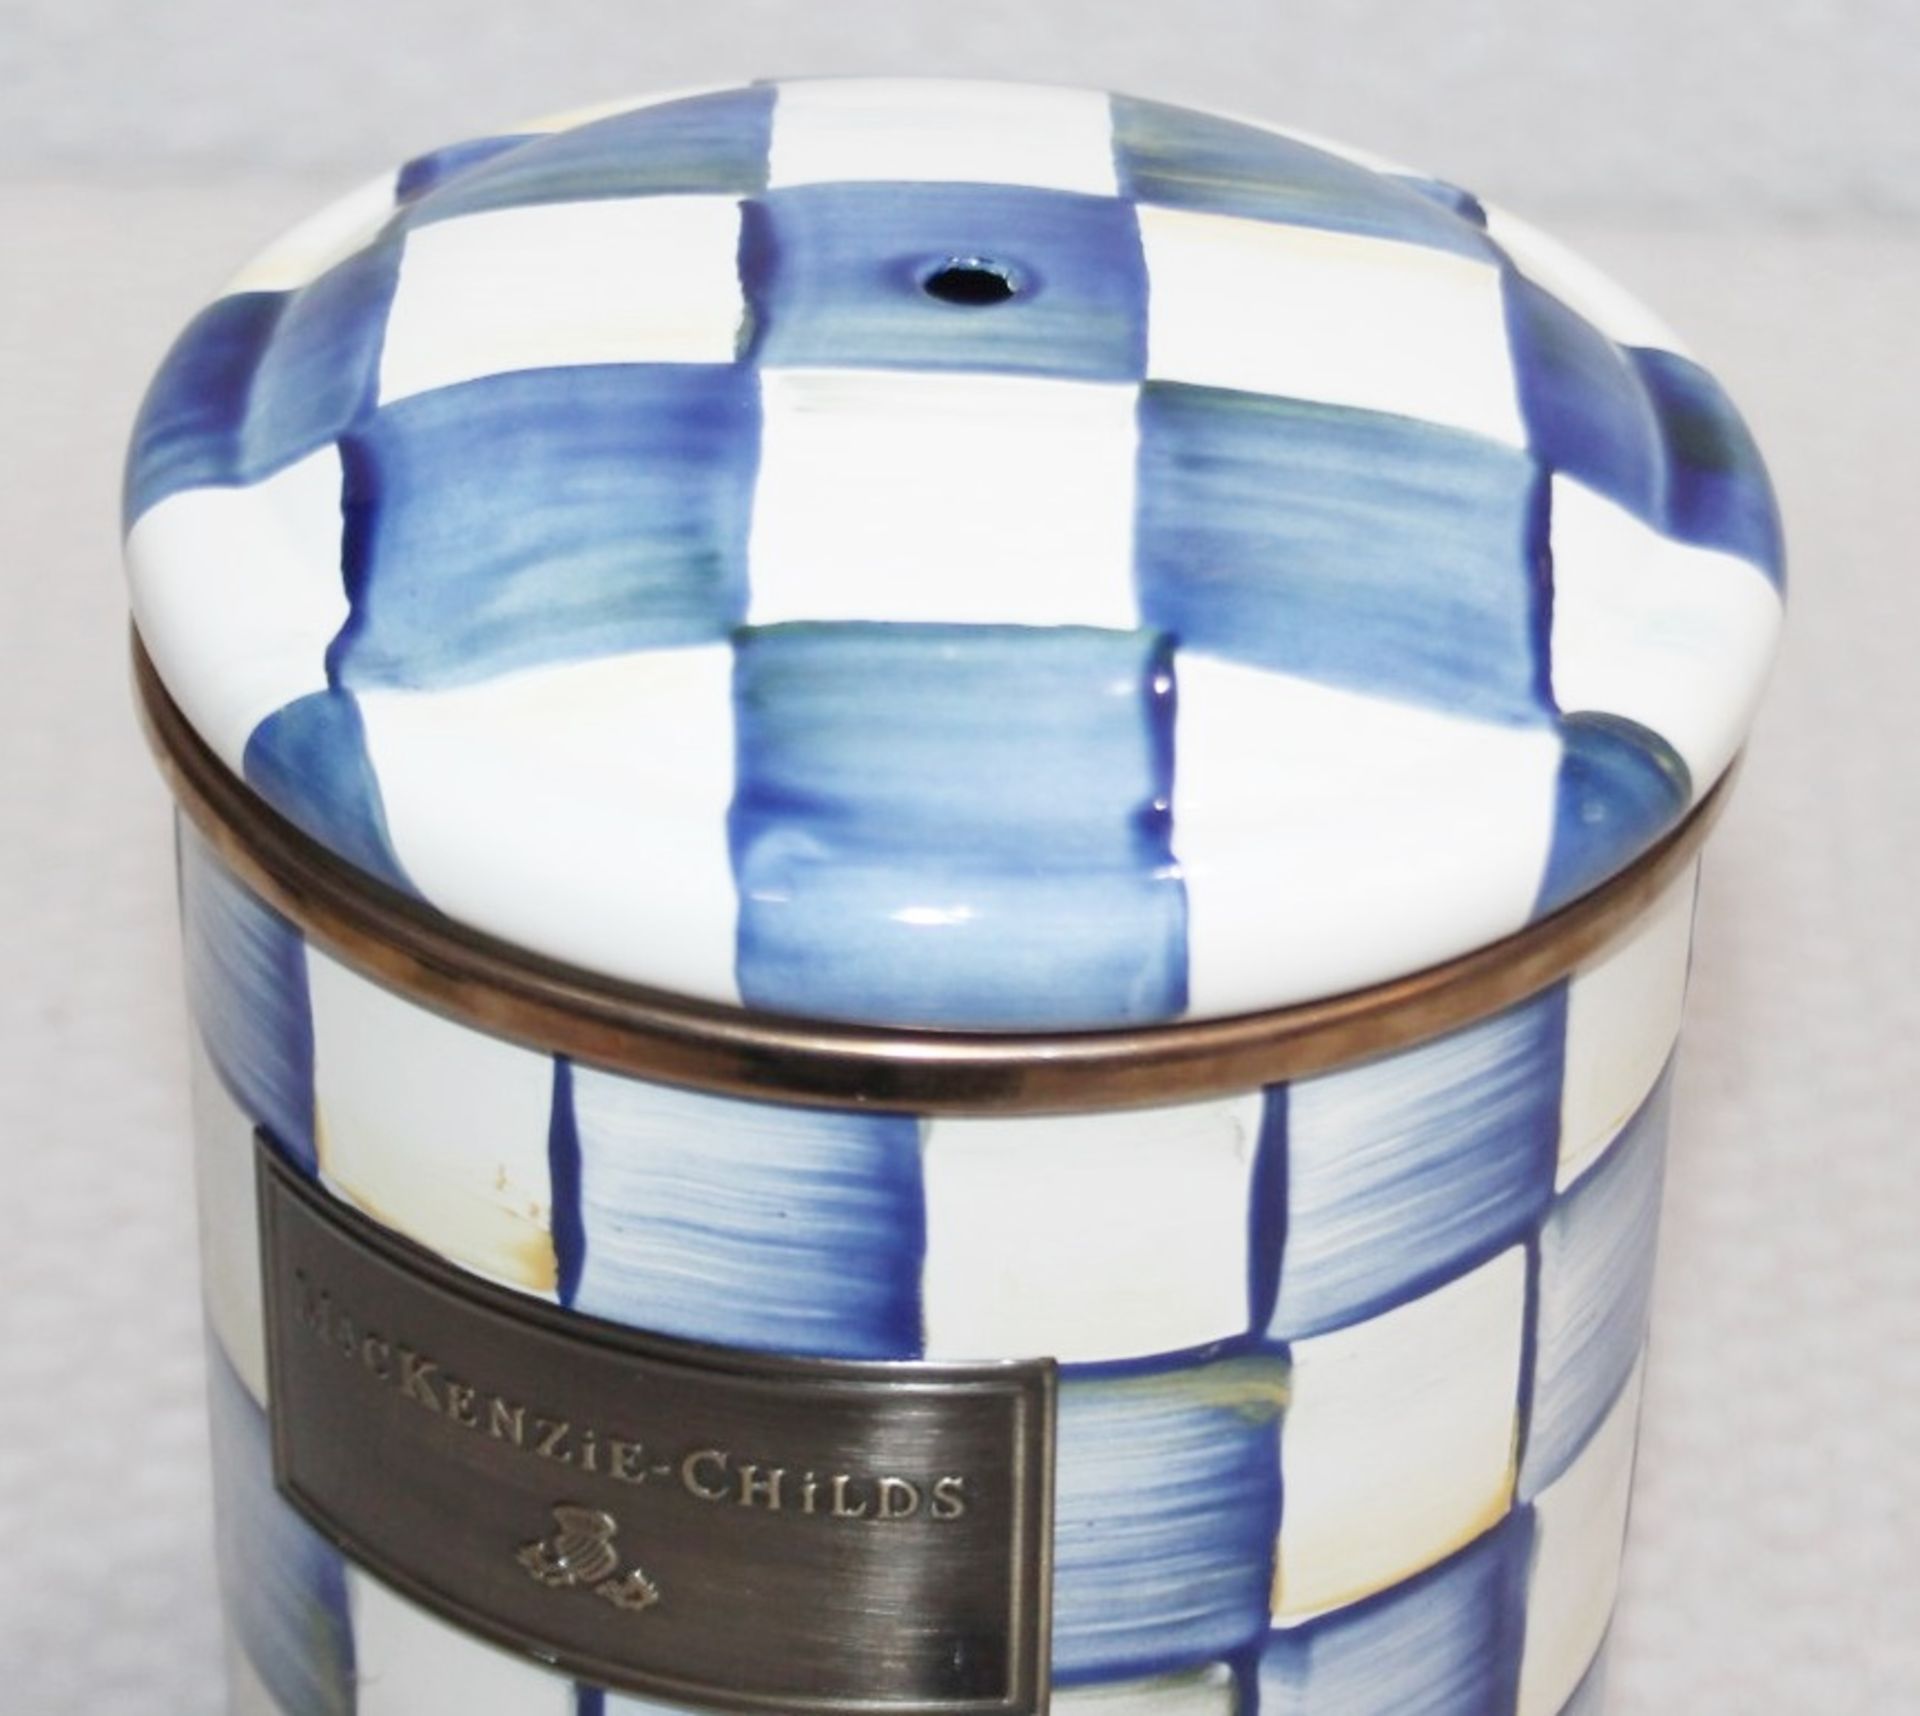 1 x MACKENZIE-CHILDS Handpainted 'Royal Check' Canister - Original Price £104.00 *Read Condition - Image 7 of 7